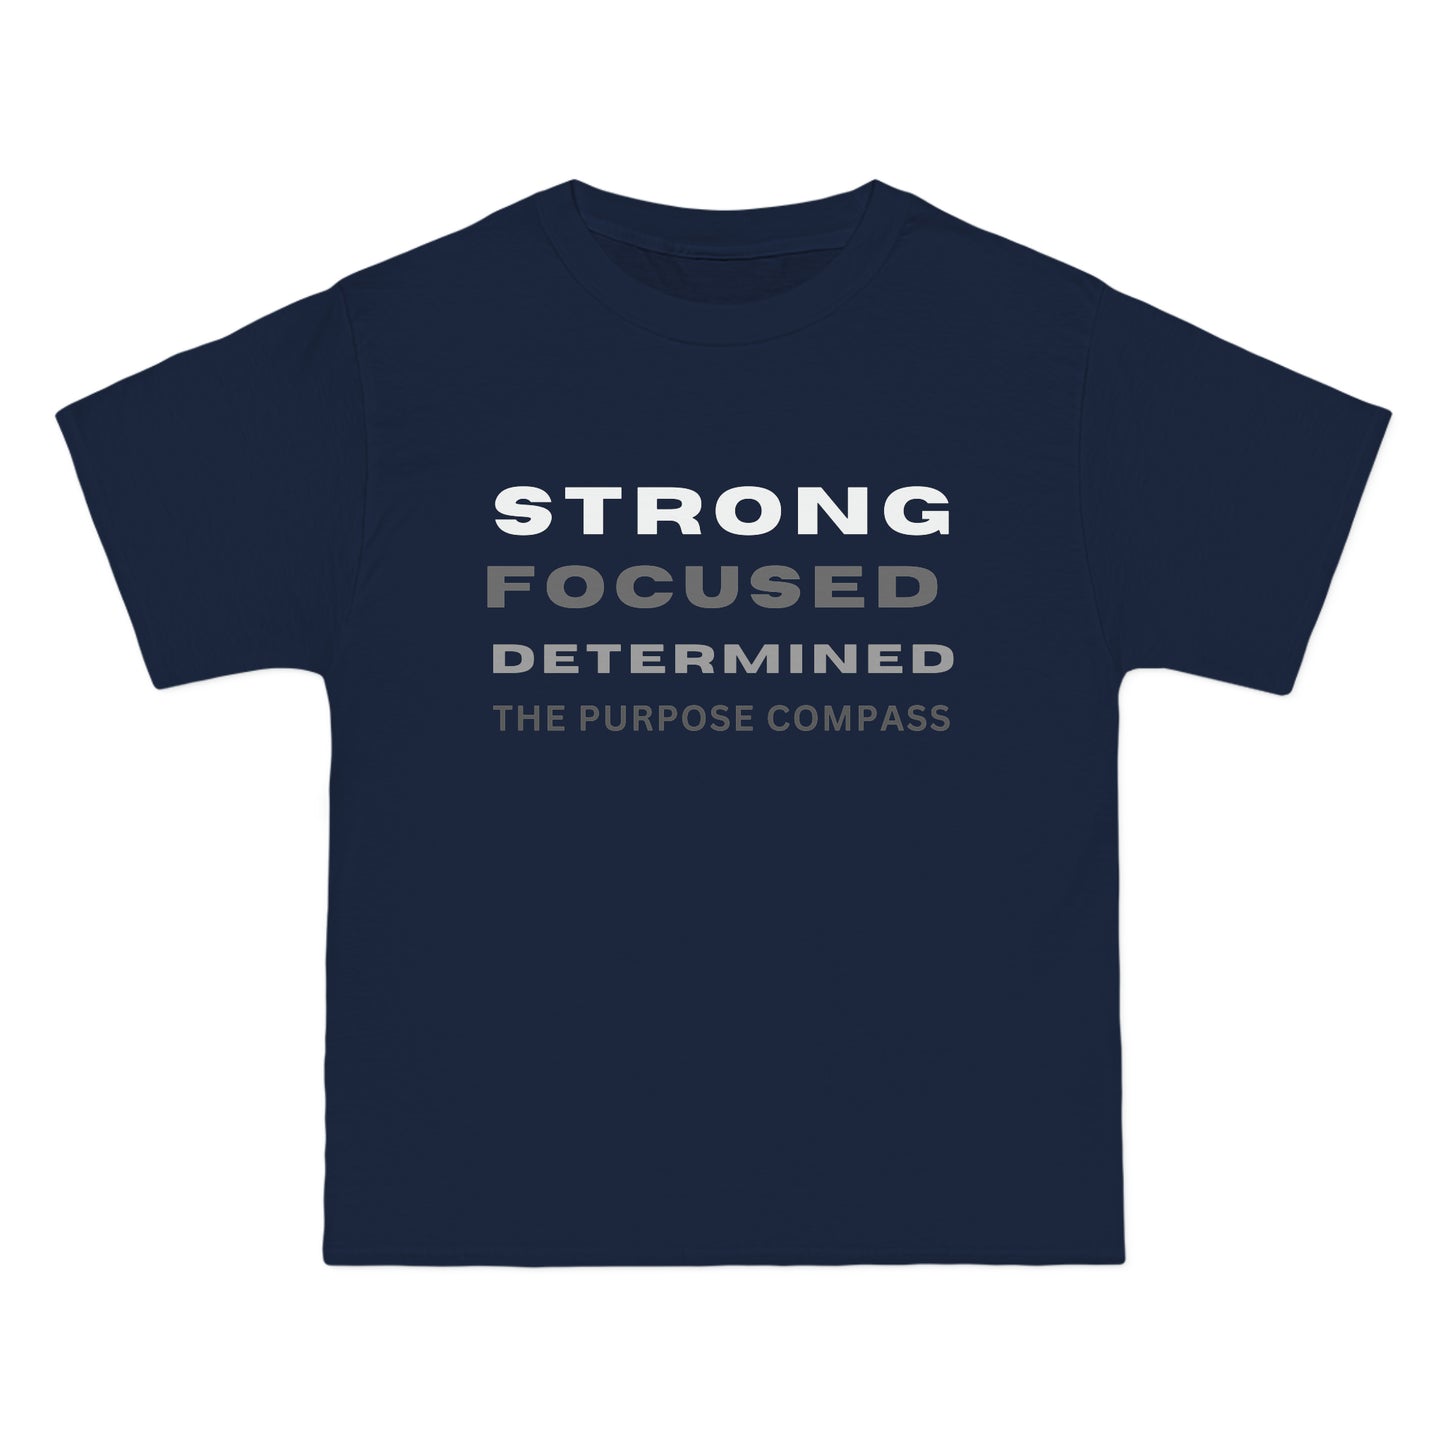 STRONG FOCUSED DETERMINED T-SHIRT